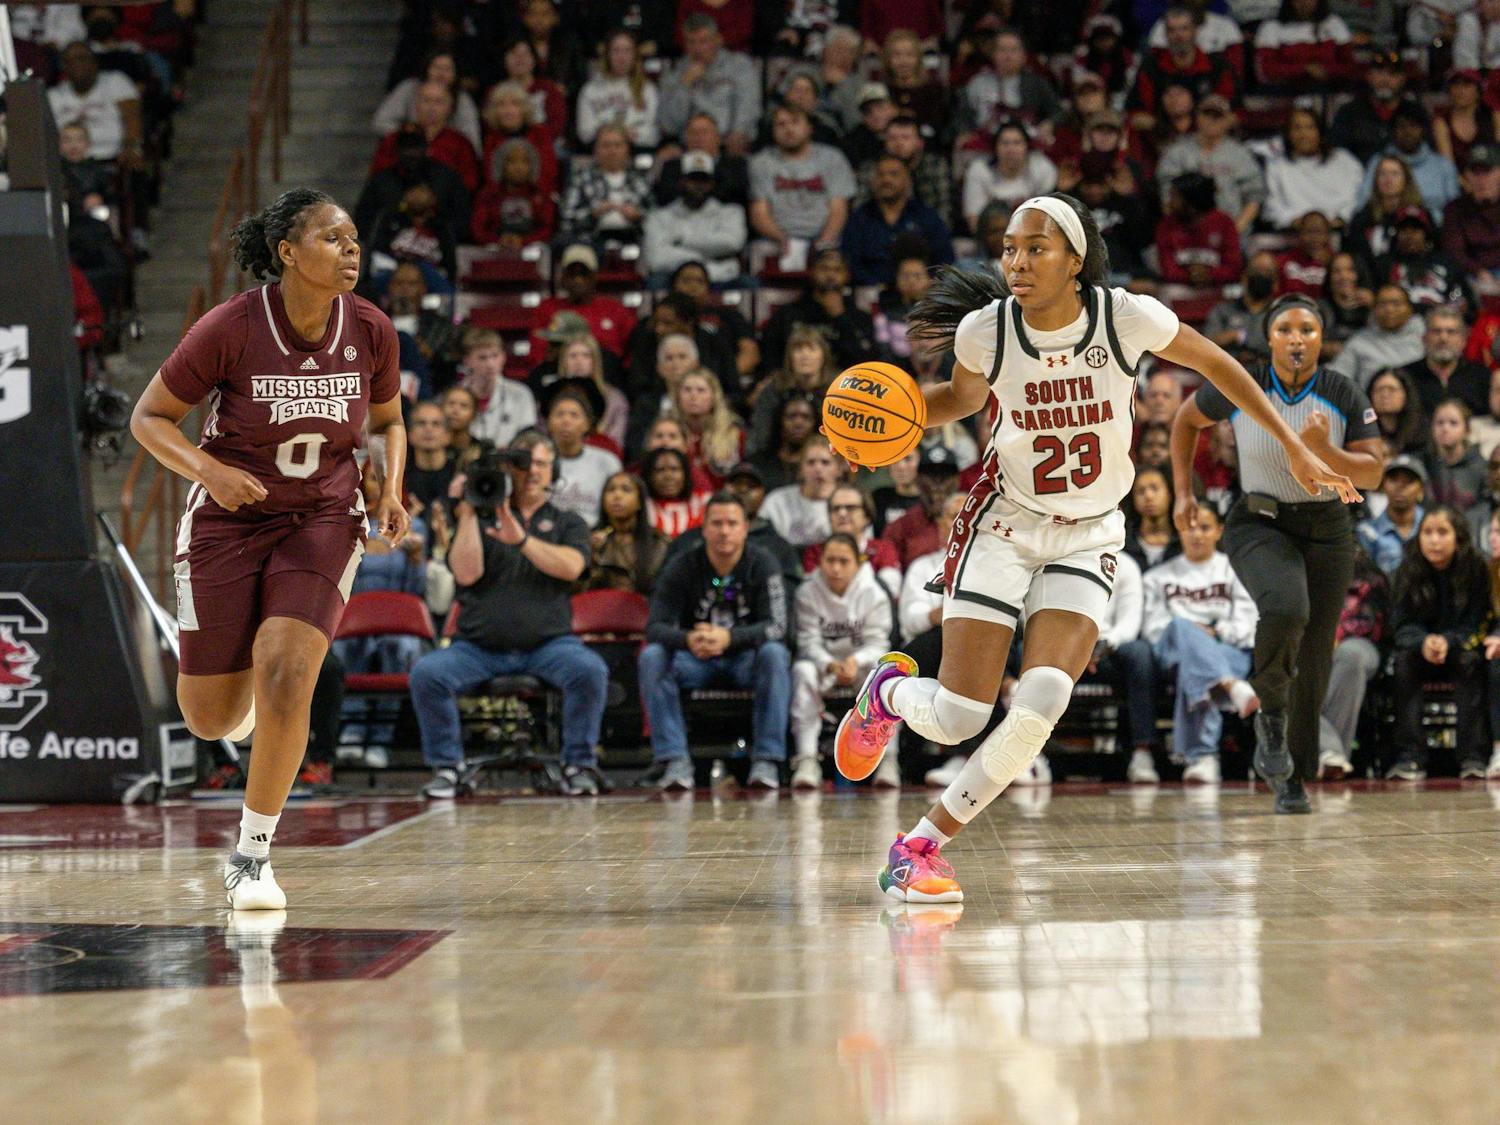 The Gamecocks women's basketball team locked in a win over the Mississippi State Bulldogs Sunday afternoon, holding onto its undefeated record. The team kept the lead in all four periods, ending the Jan. 7 match with a score of 89-66. Bree Hall scored 15 points, helping to close an uncomfortably close margin in the third quarter with assistance during the rest of the game from Kamilla Cardoso, who scored 13 points. Up next, the Gamecocks are scheduled to face Missouri Thursday on the road.